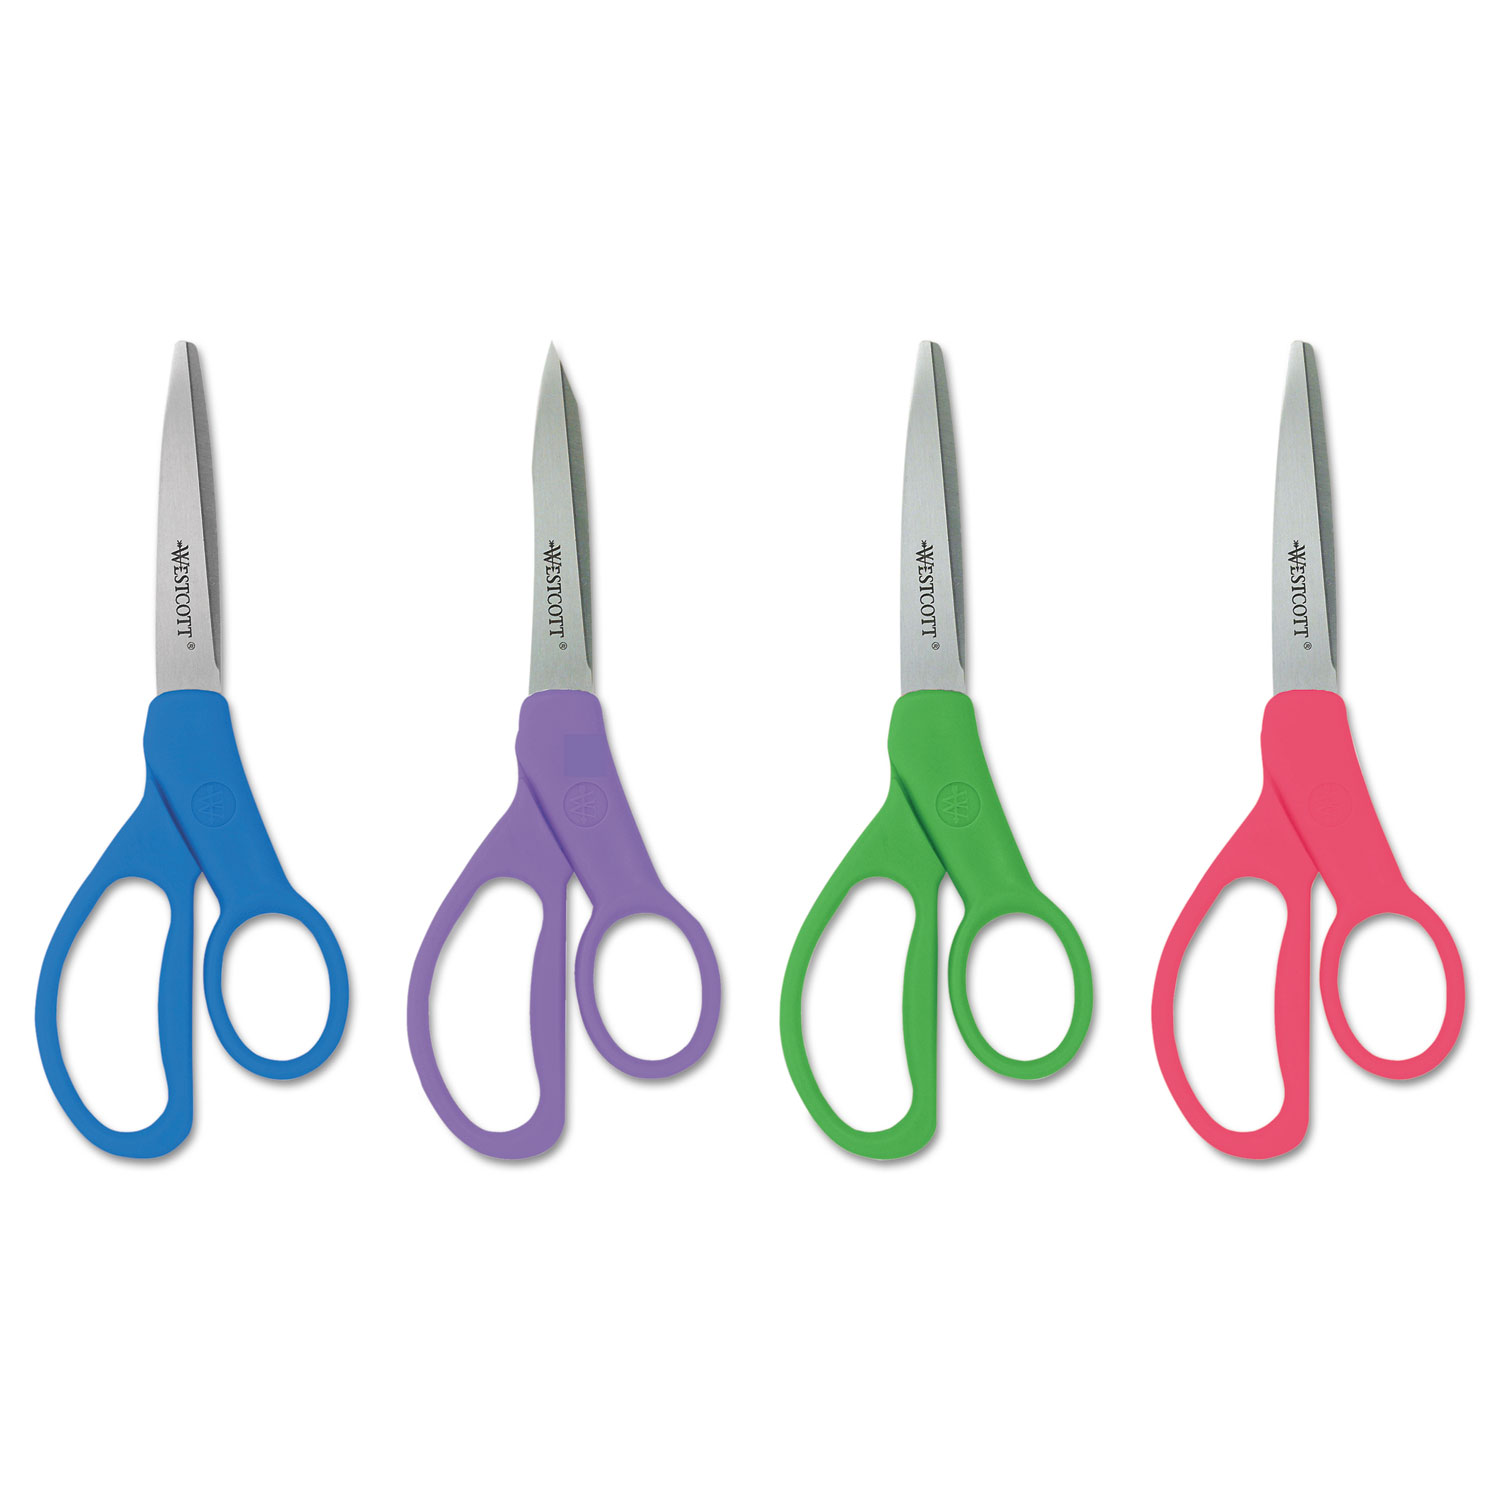  Westcott 14231 Student Scissors with Antimicrobial Protection, Pointed Tip, 7 Long, 3 Cut Length, Randomly Assorted Straight Handles (ACM14231) 